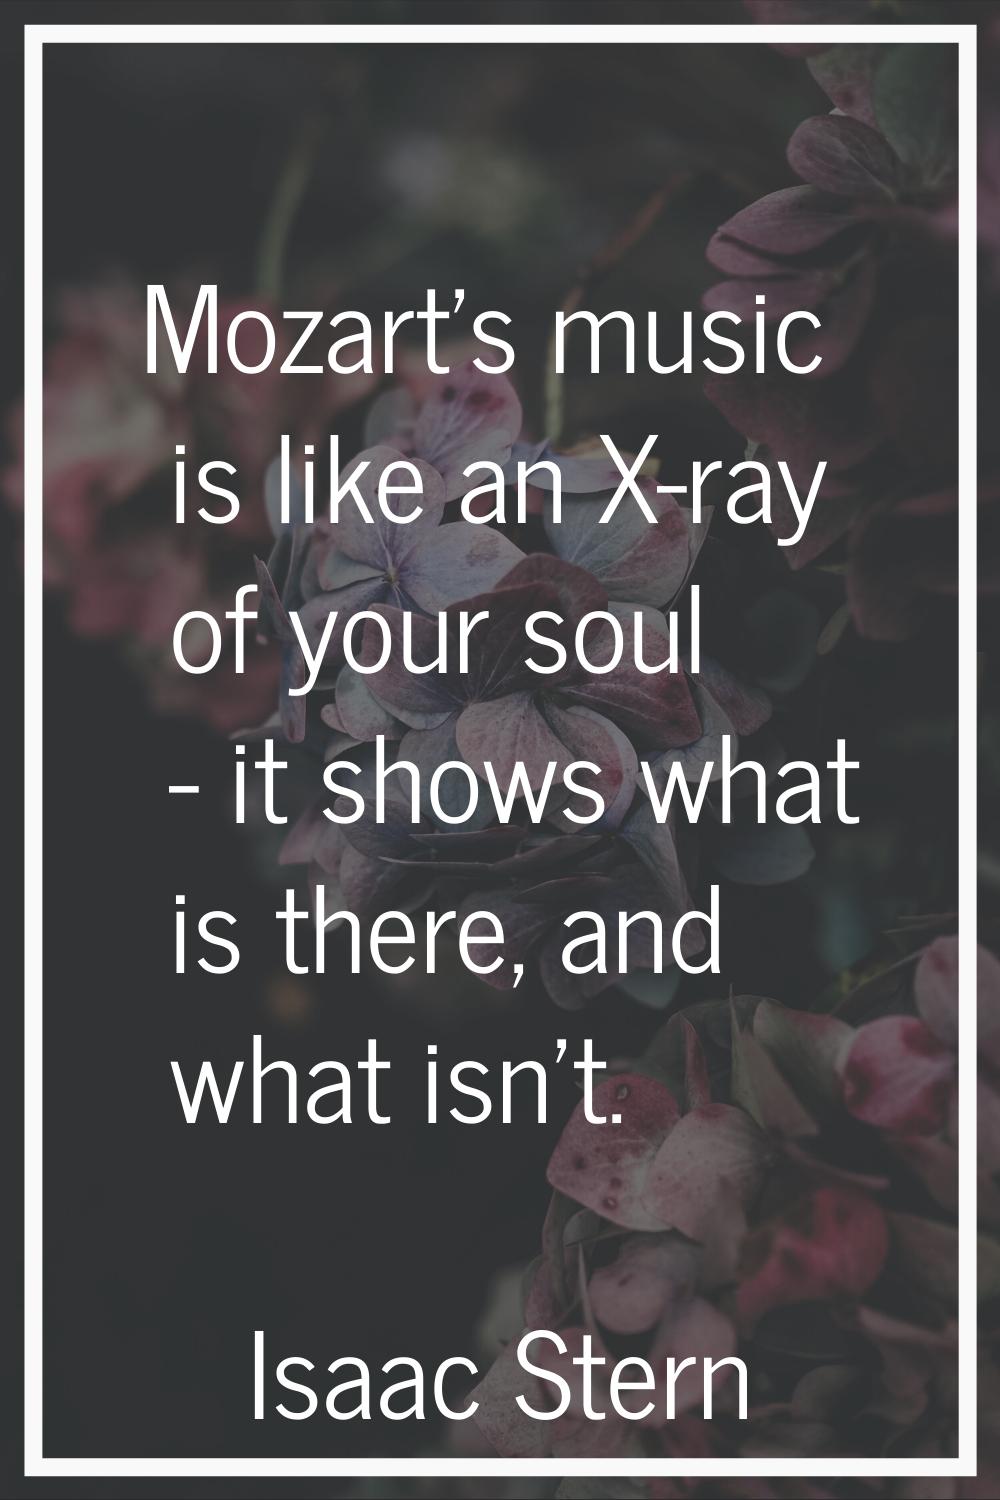 Mozart's music is like an X-ray of your soul - it shows what is there, and what isn't.